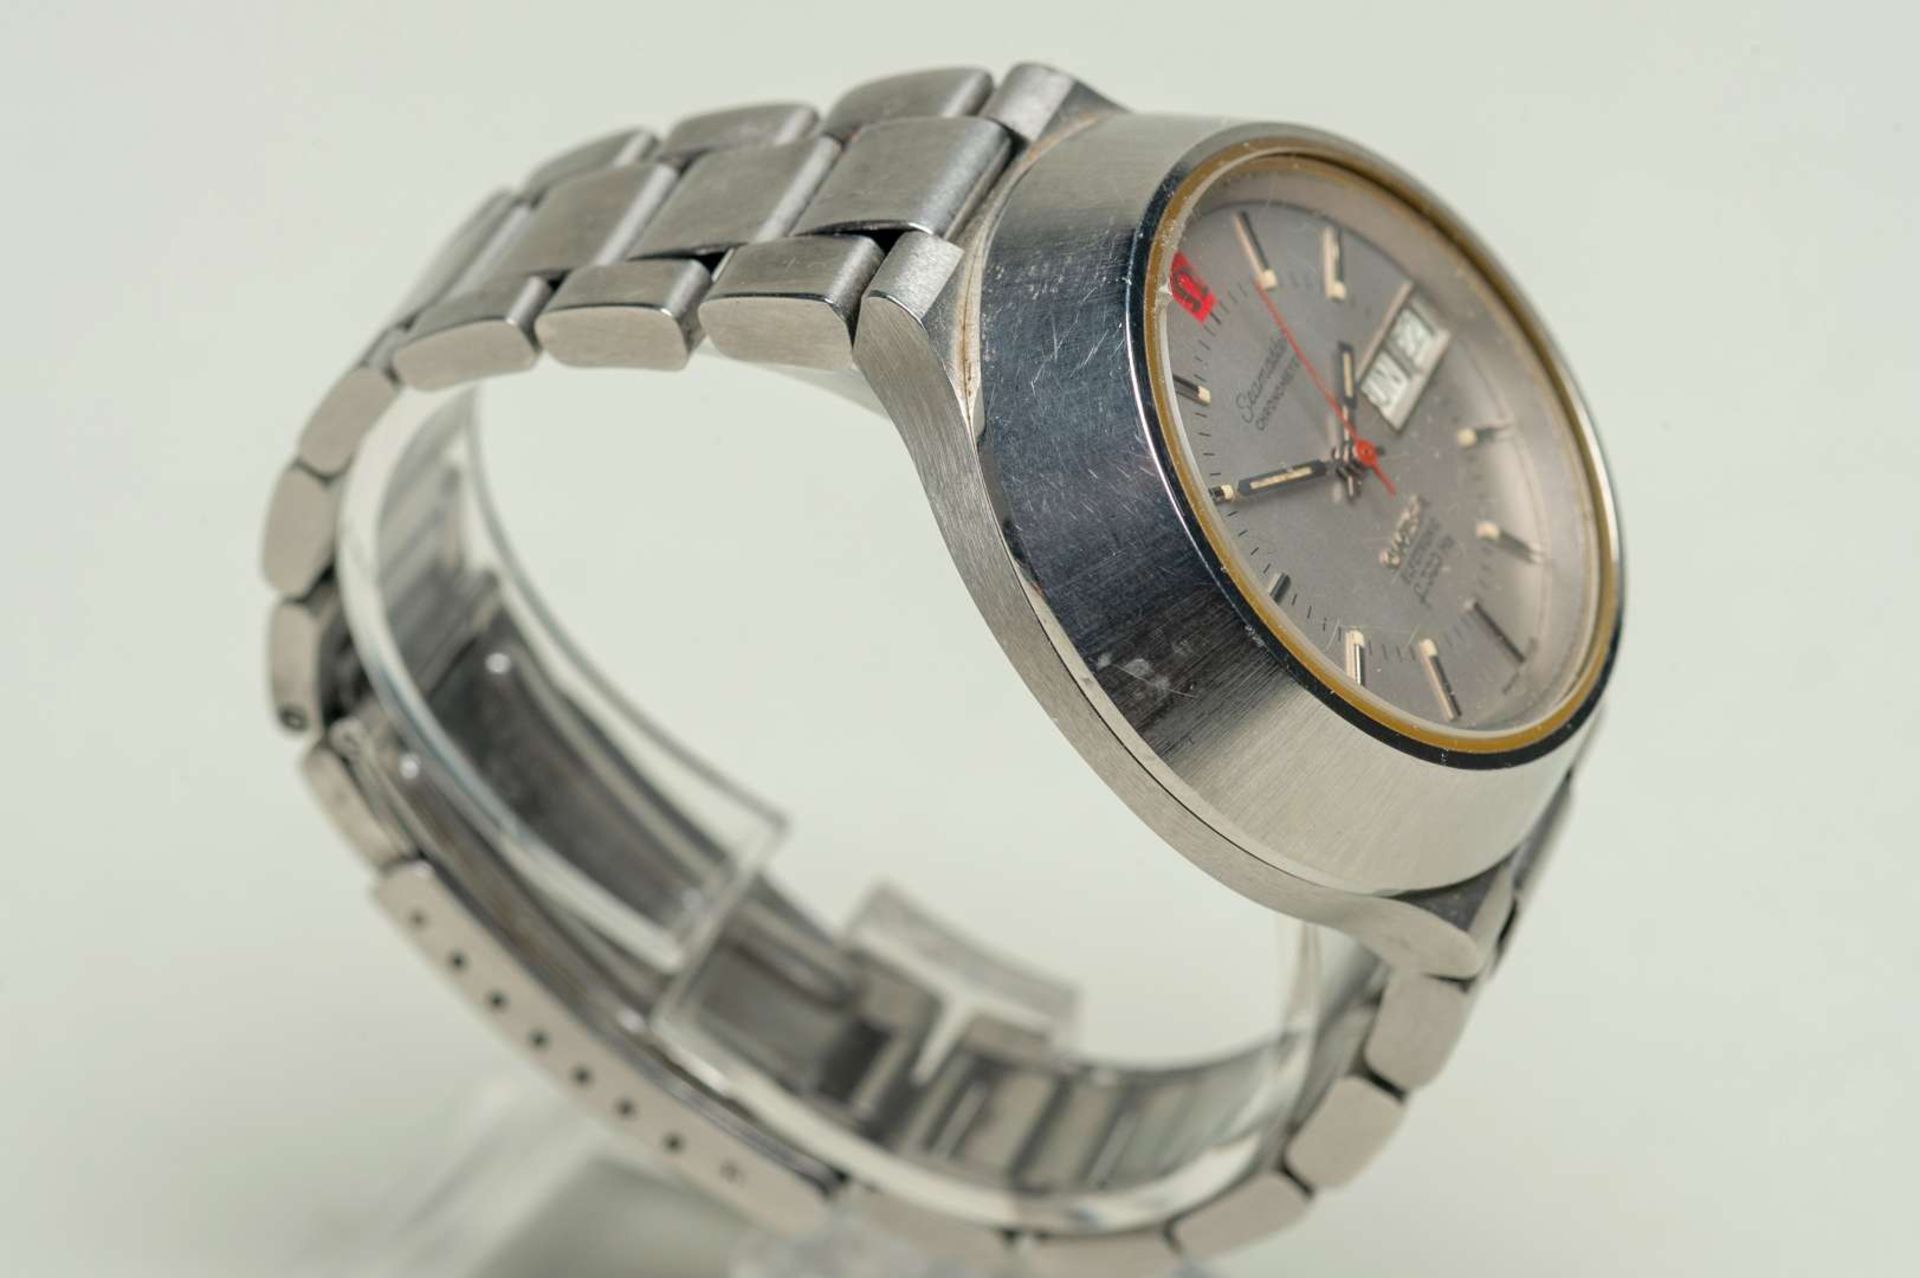 OMEGA, a 1970's Seamaster, Chronometer, Electronic f300 Hz, stainless steel day/date wristwatch. - Image 3 of 8